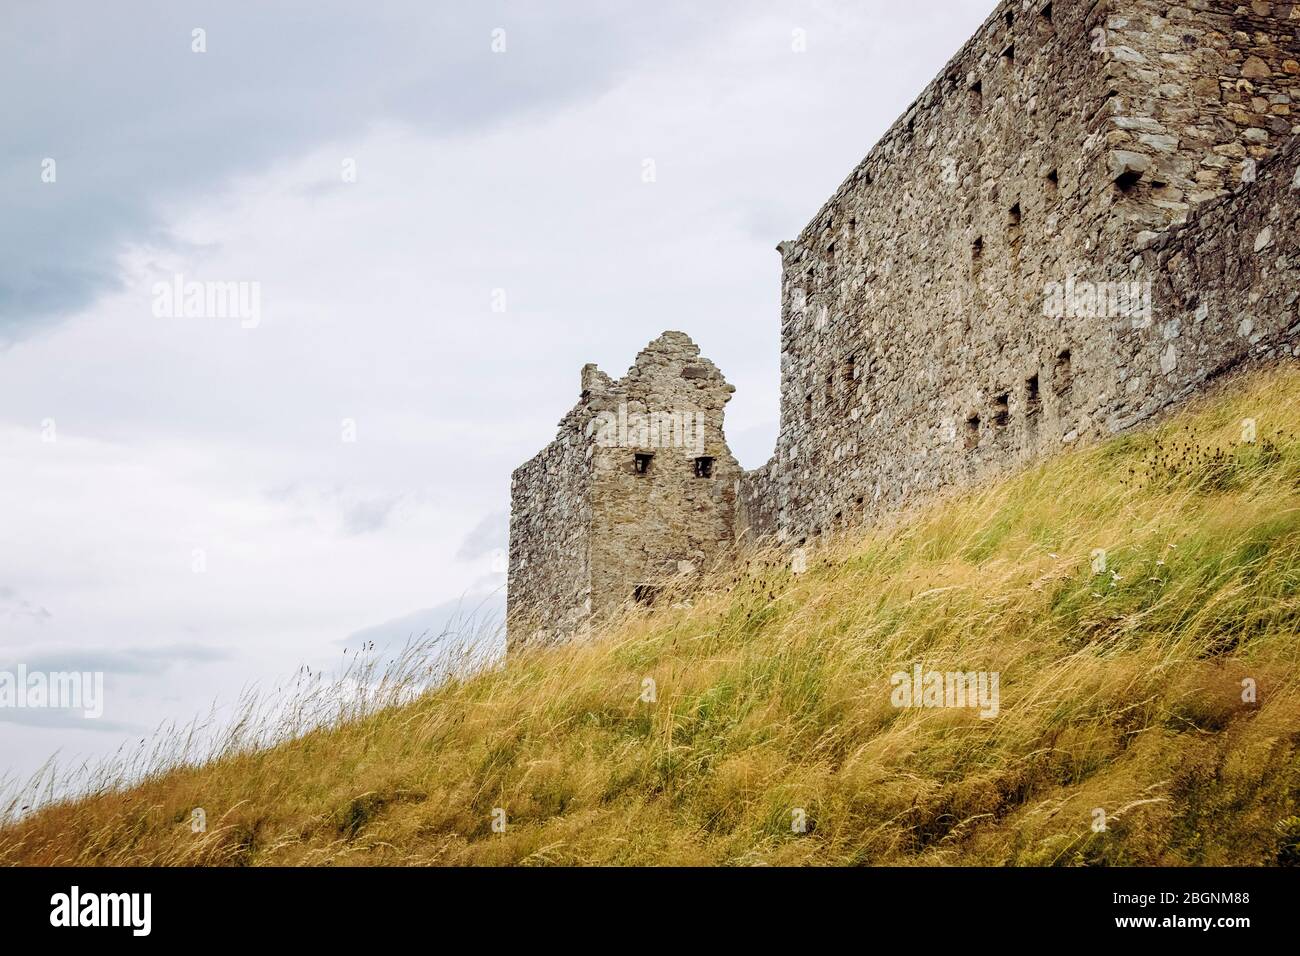 Ruthven Barracks by Ruthven in Badenoch, Scotland in Europe UK. Built in 1719. Stock Photo